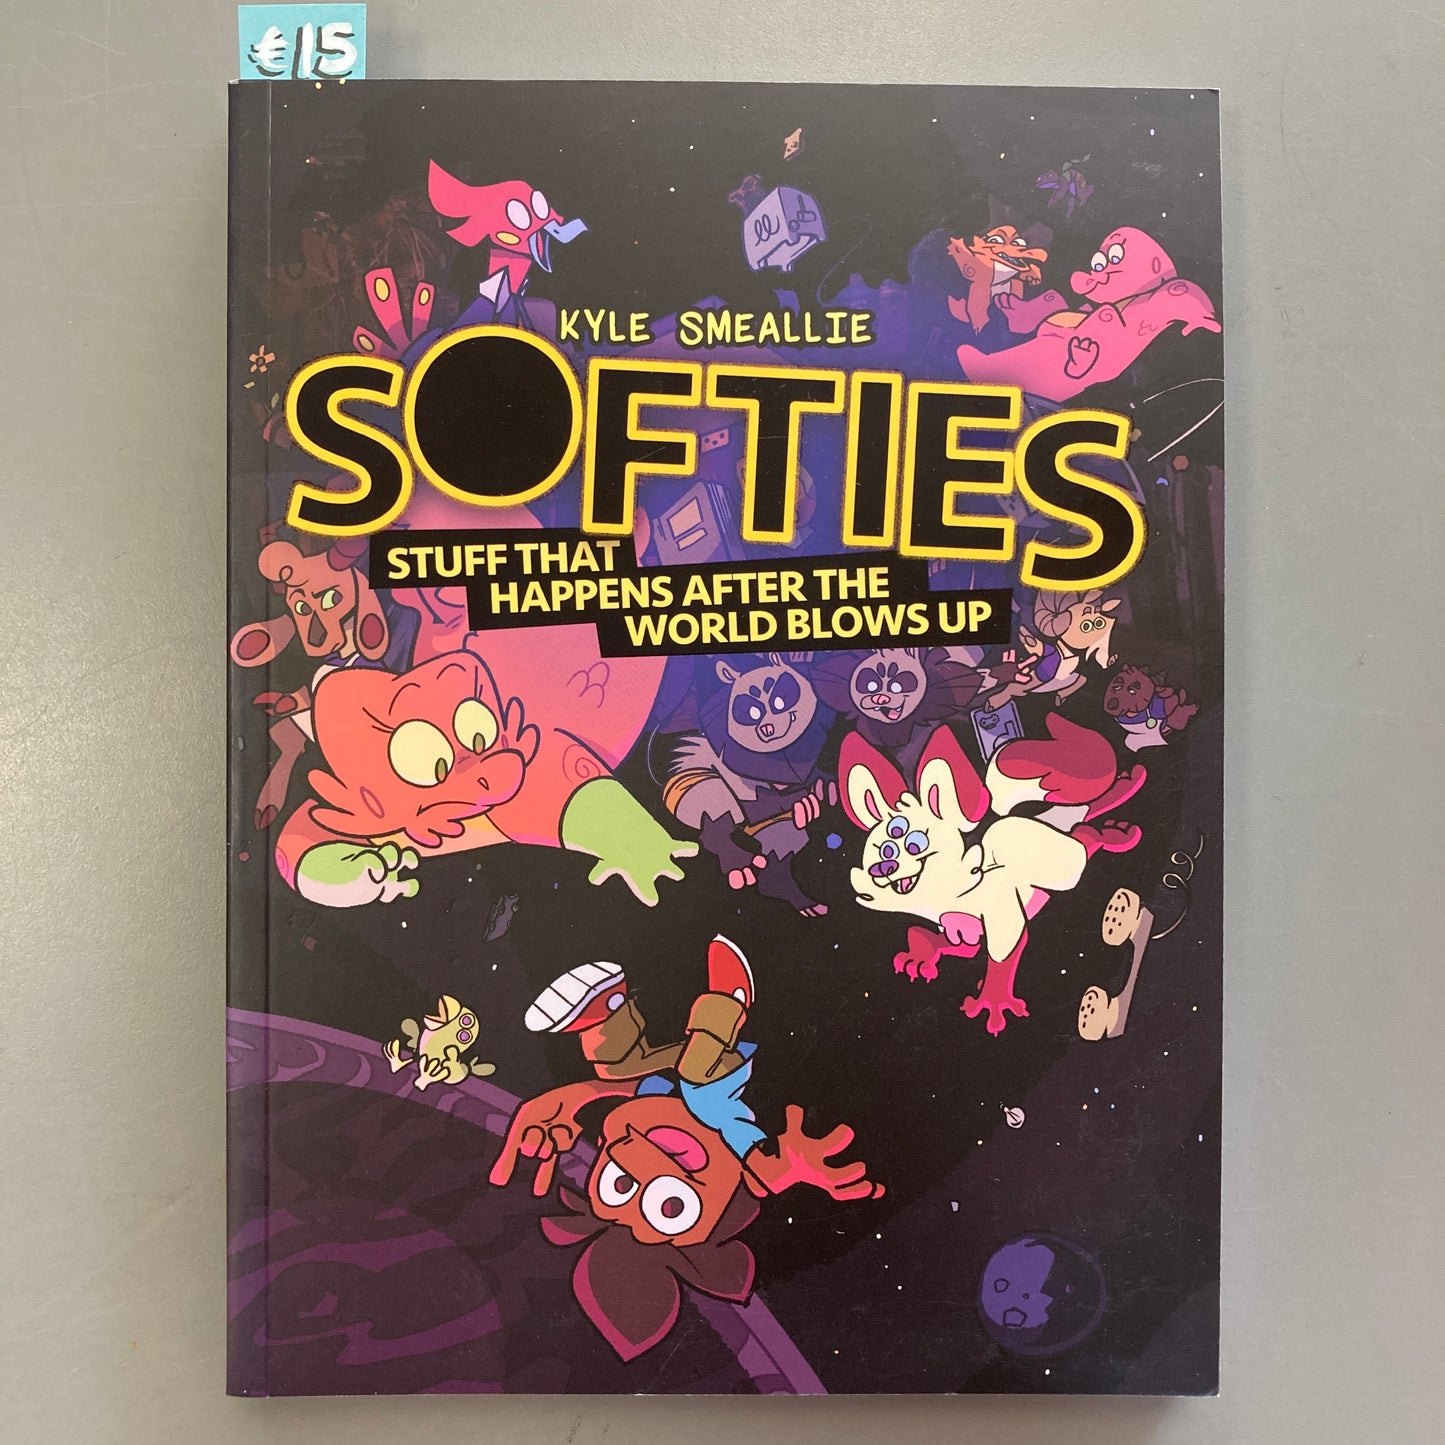 Softies: Stuff that Happens After the World Blows Up